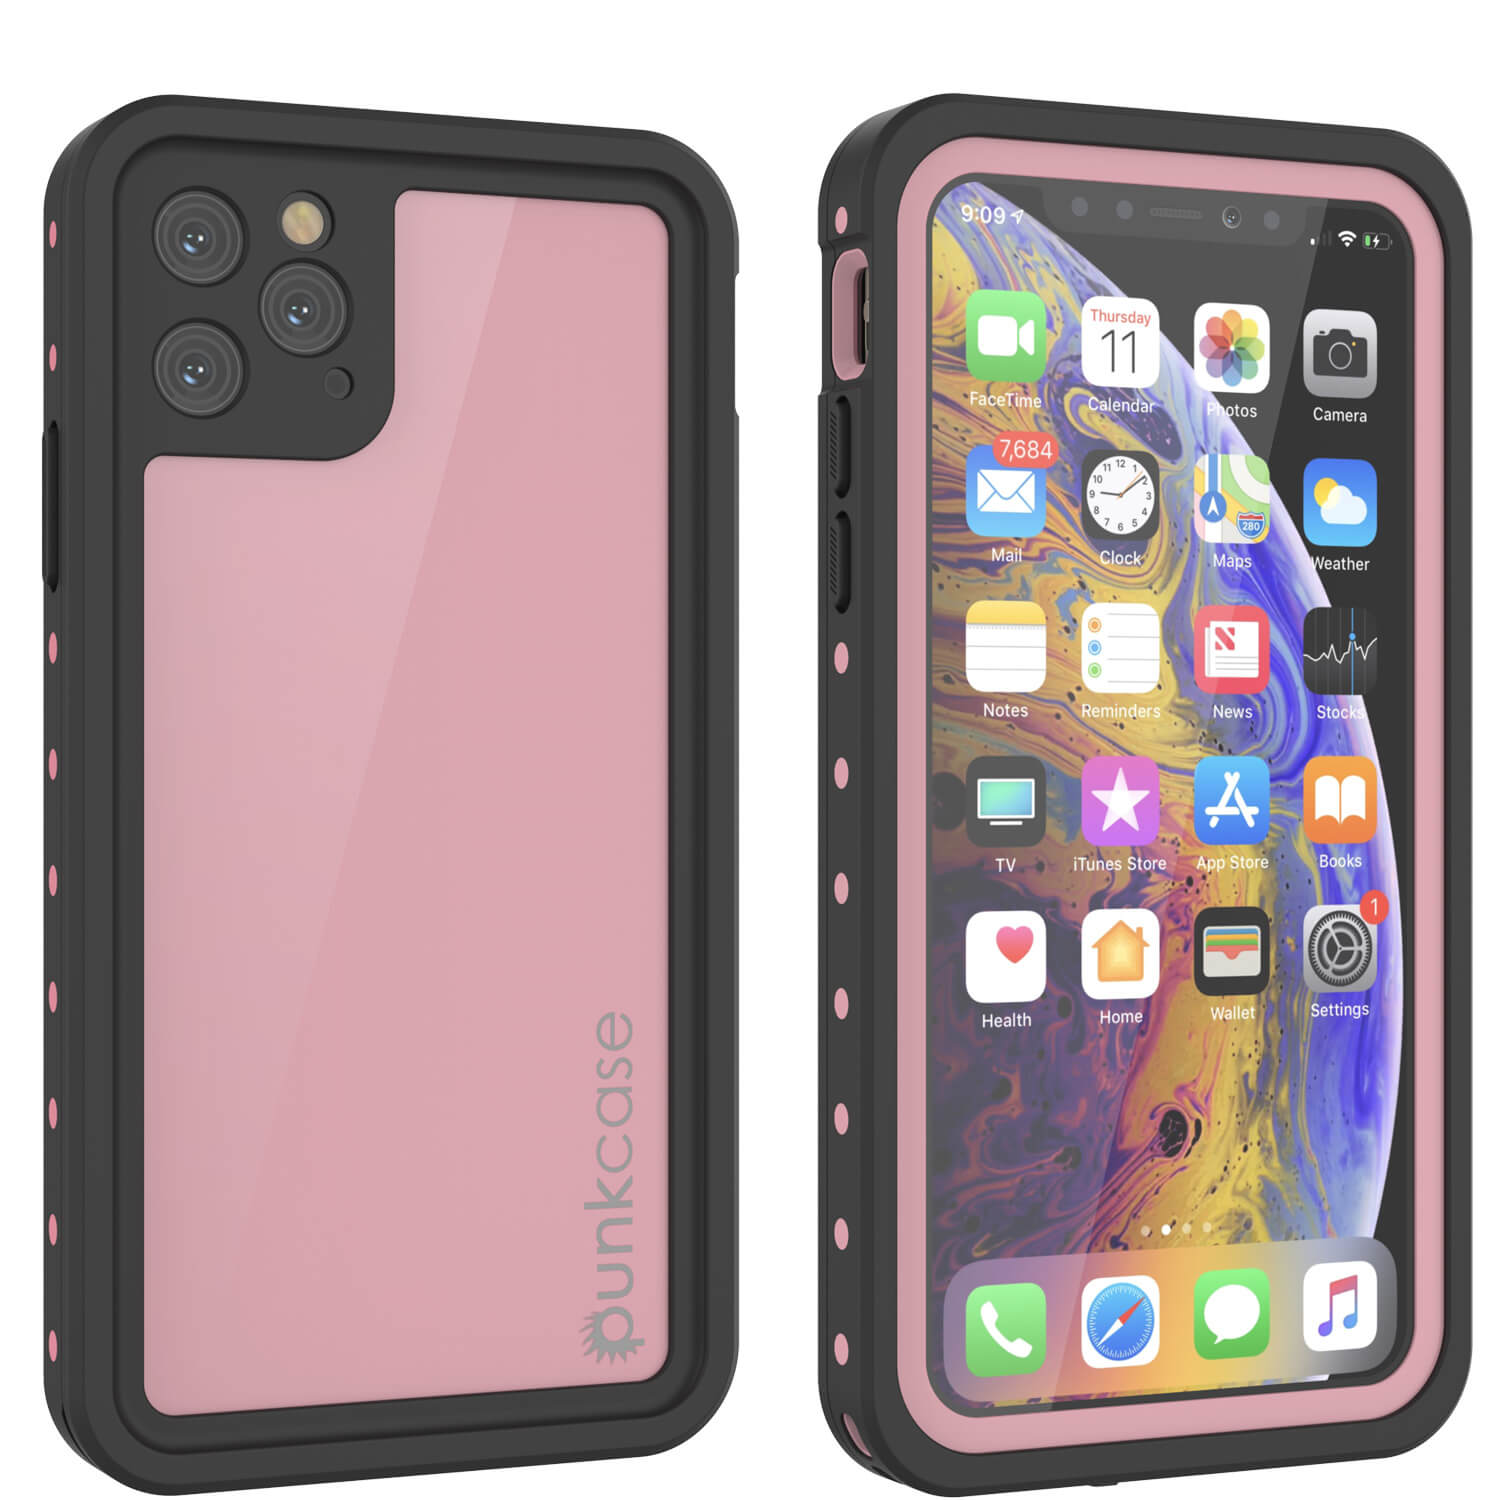 Does the iPhone XS fit 11 Pro Cases? 